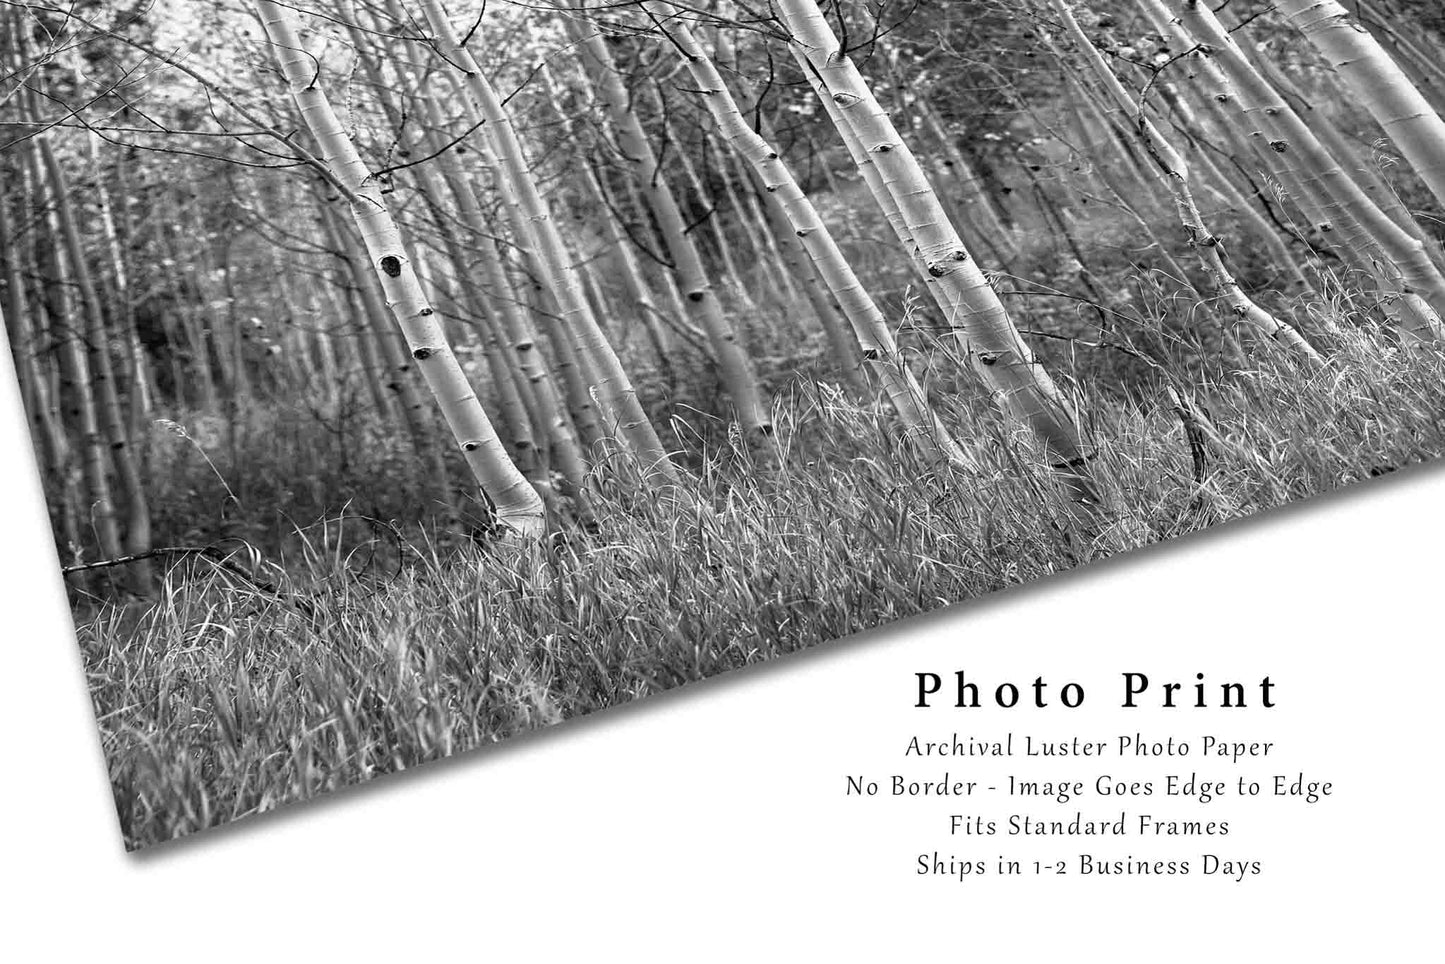 Black and White Photography Art Print - Wall Art Picture of Fall Aspen Trees in Colorado Forest Western Decor 4x6 to 40x60